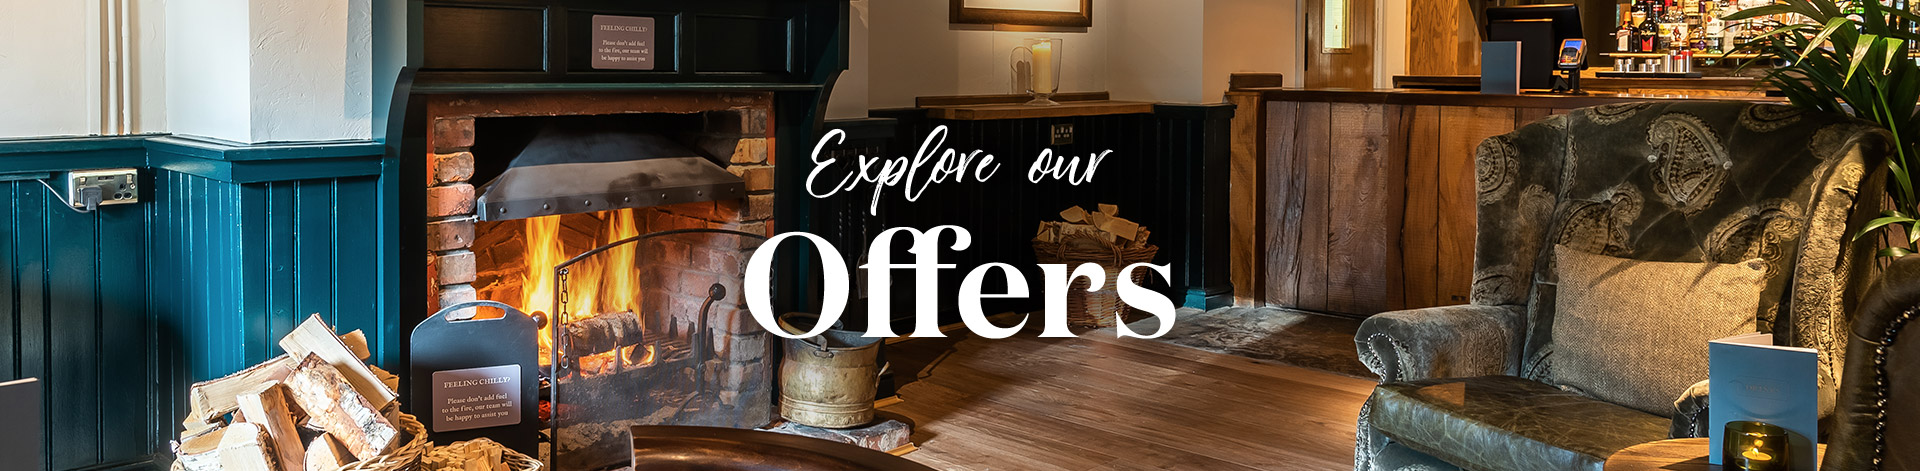 Our latest offers at The Swan Inn, Norfolk